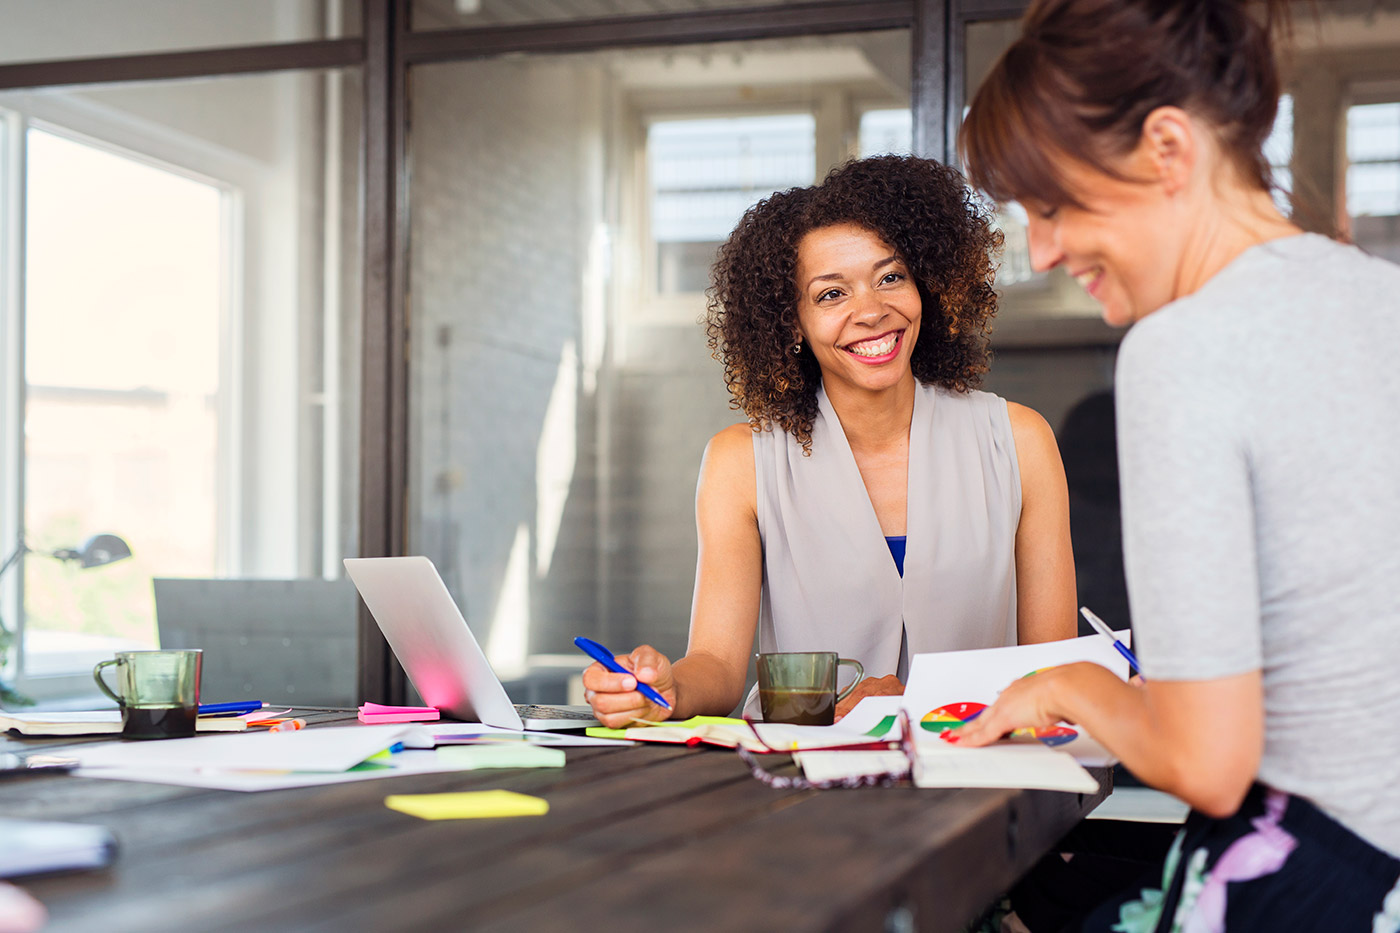 Women Empowering Women: 5 Tips to Cultivate Female Leadership Qualities